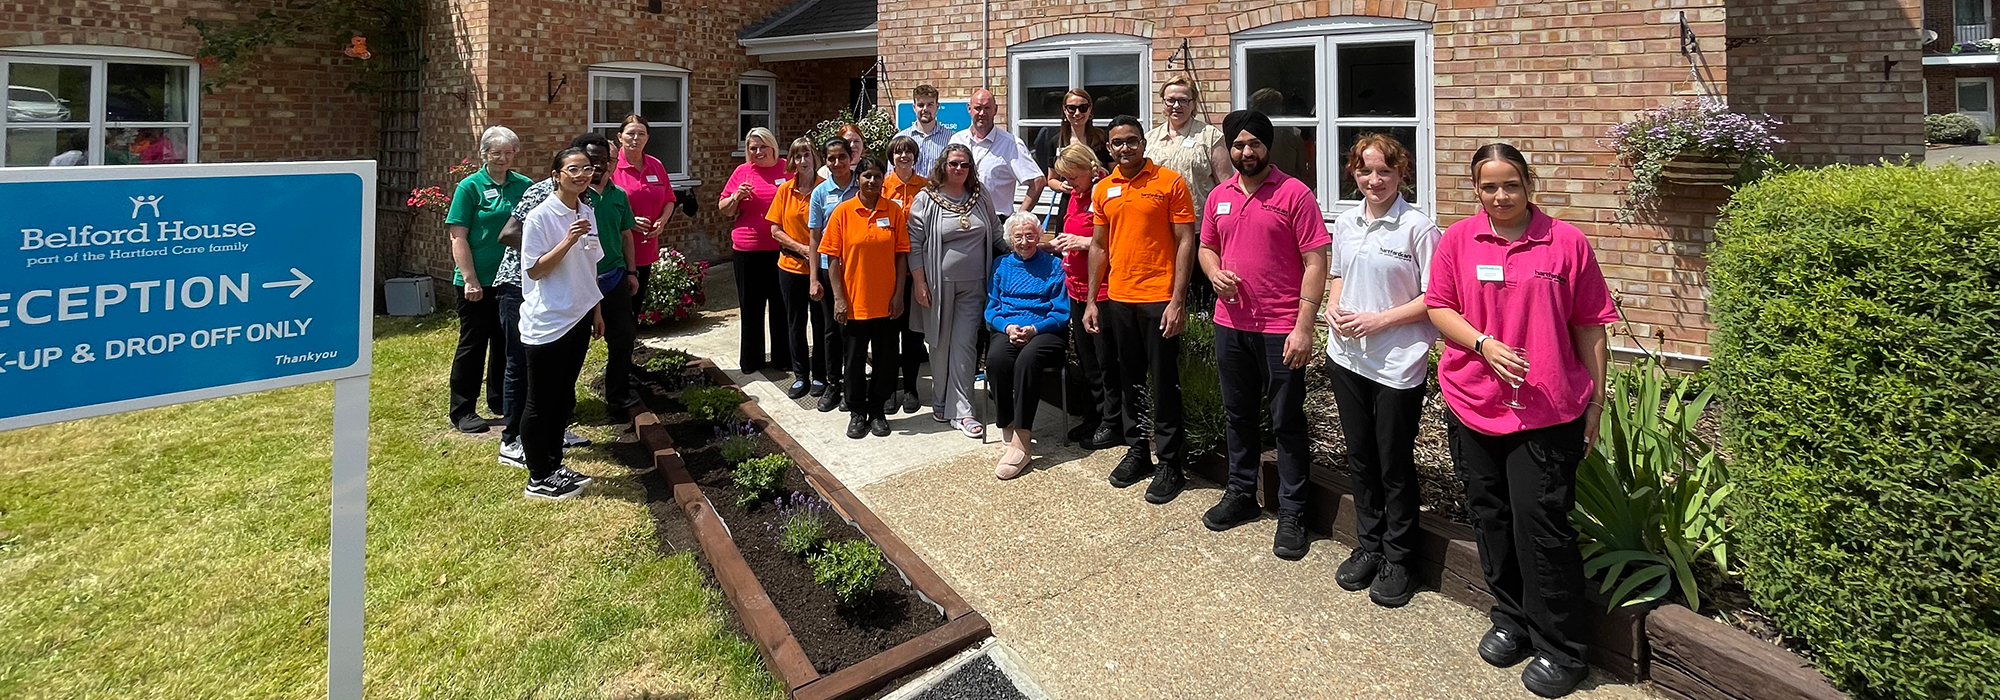 A team photo of the carers at Belford House